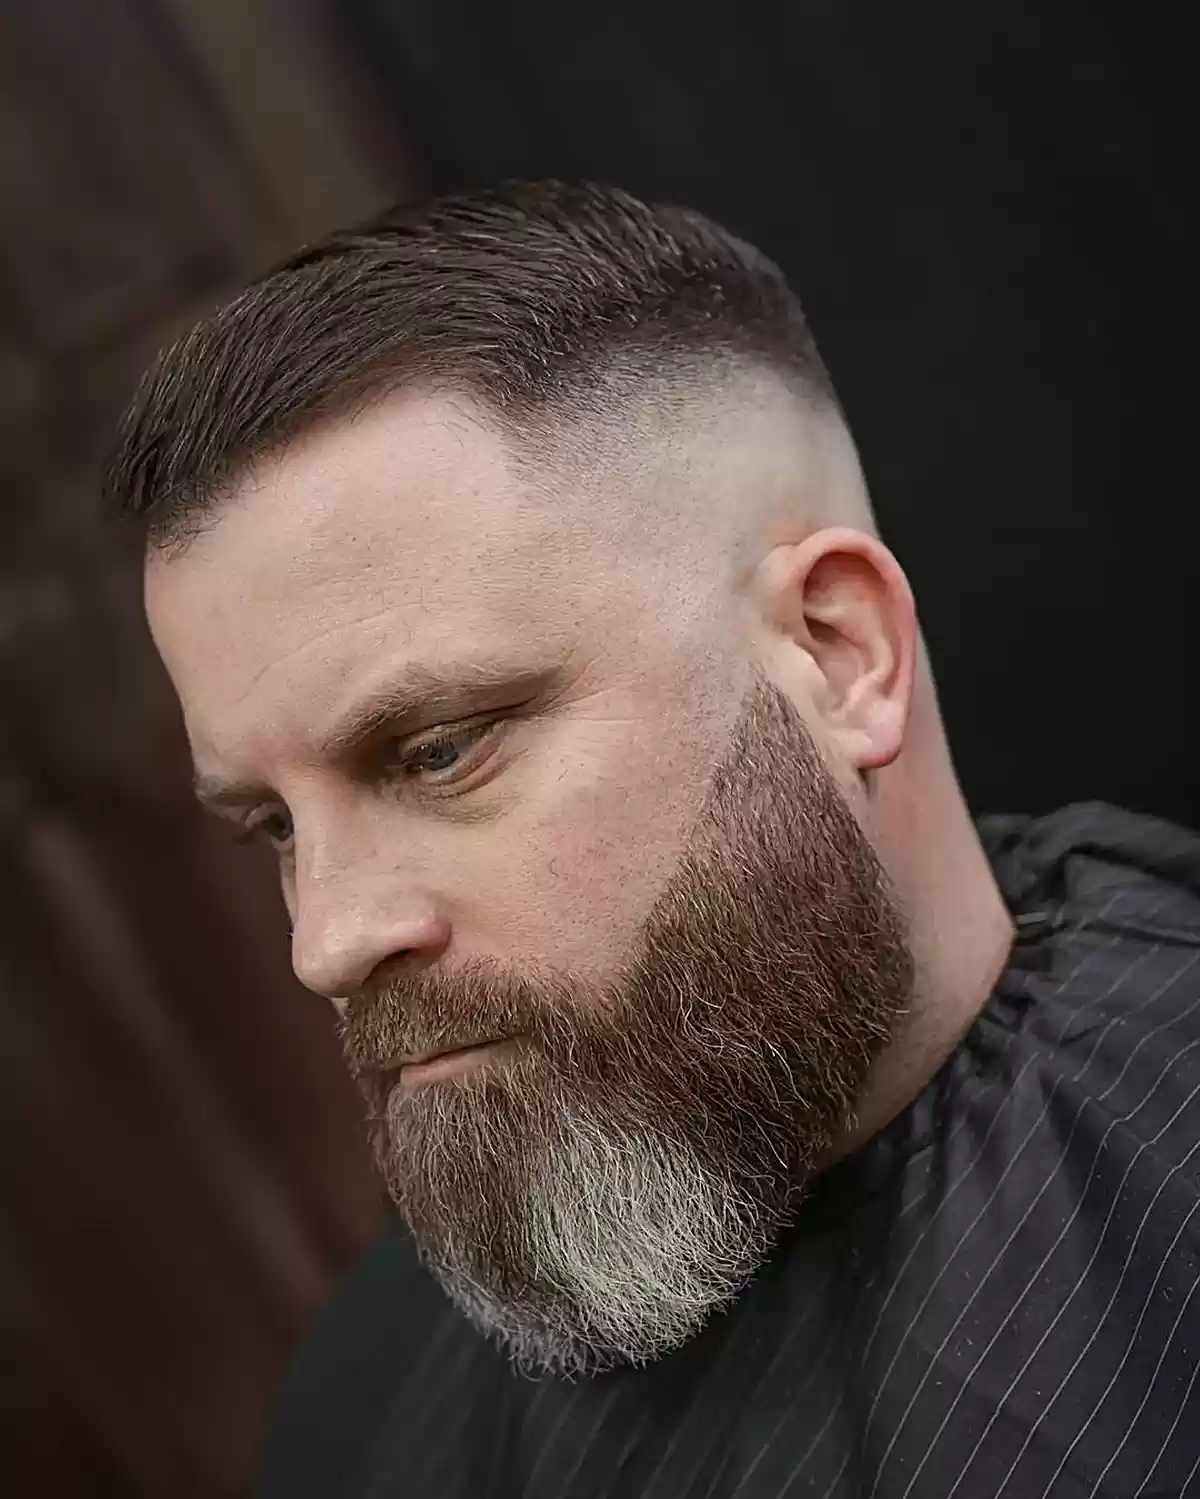 Low Side-Swept Pomp with Disconnected Skin Fade and Beard Fade